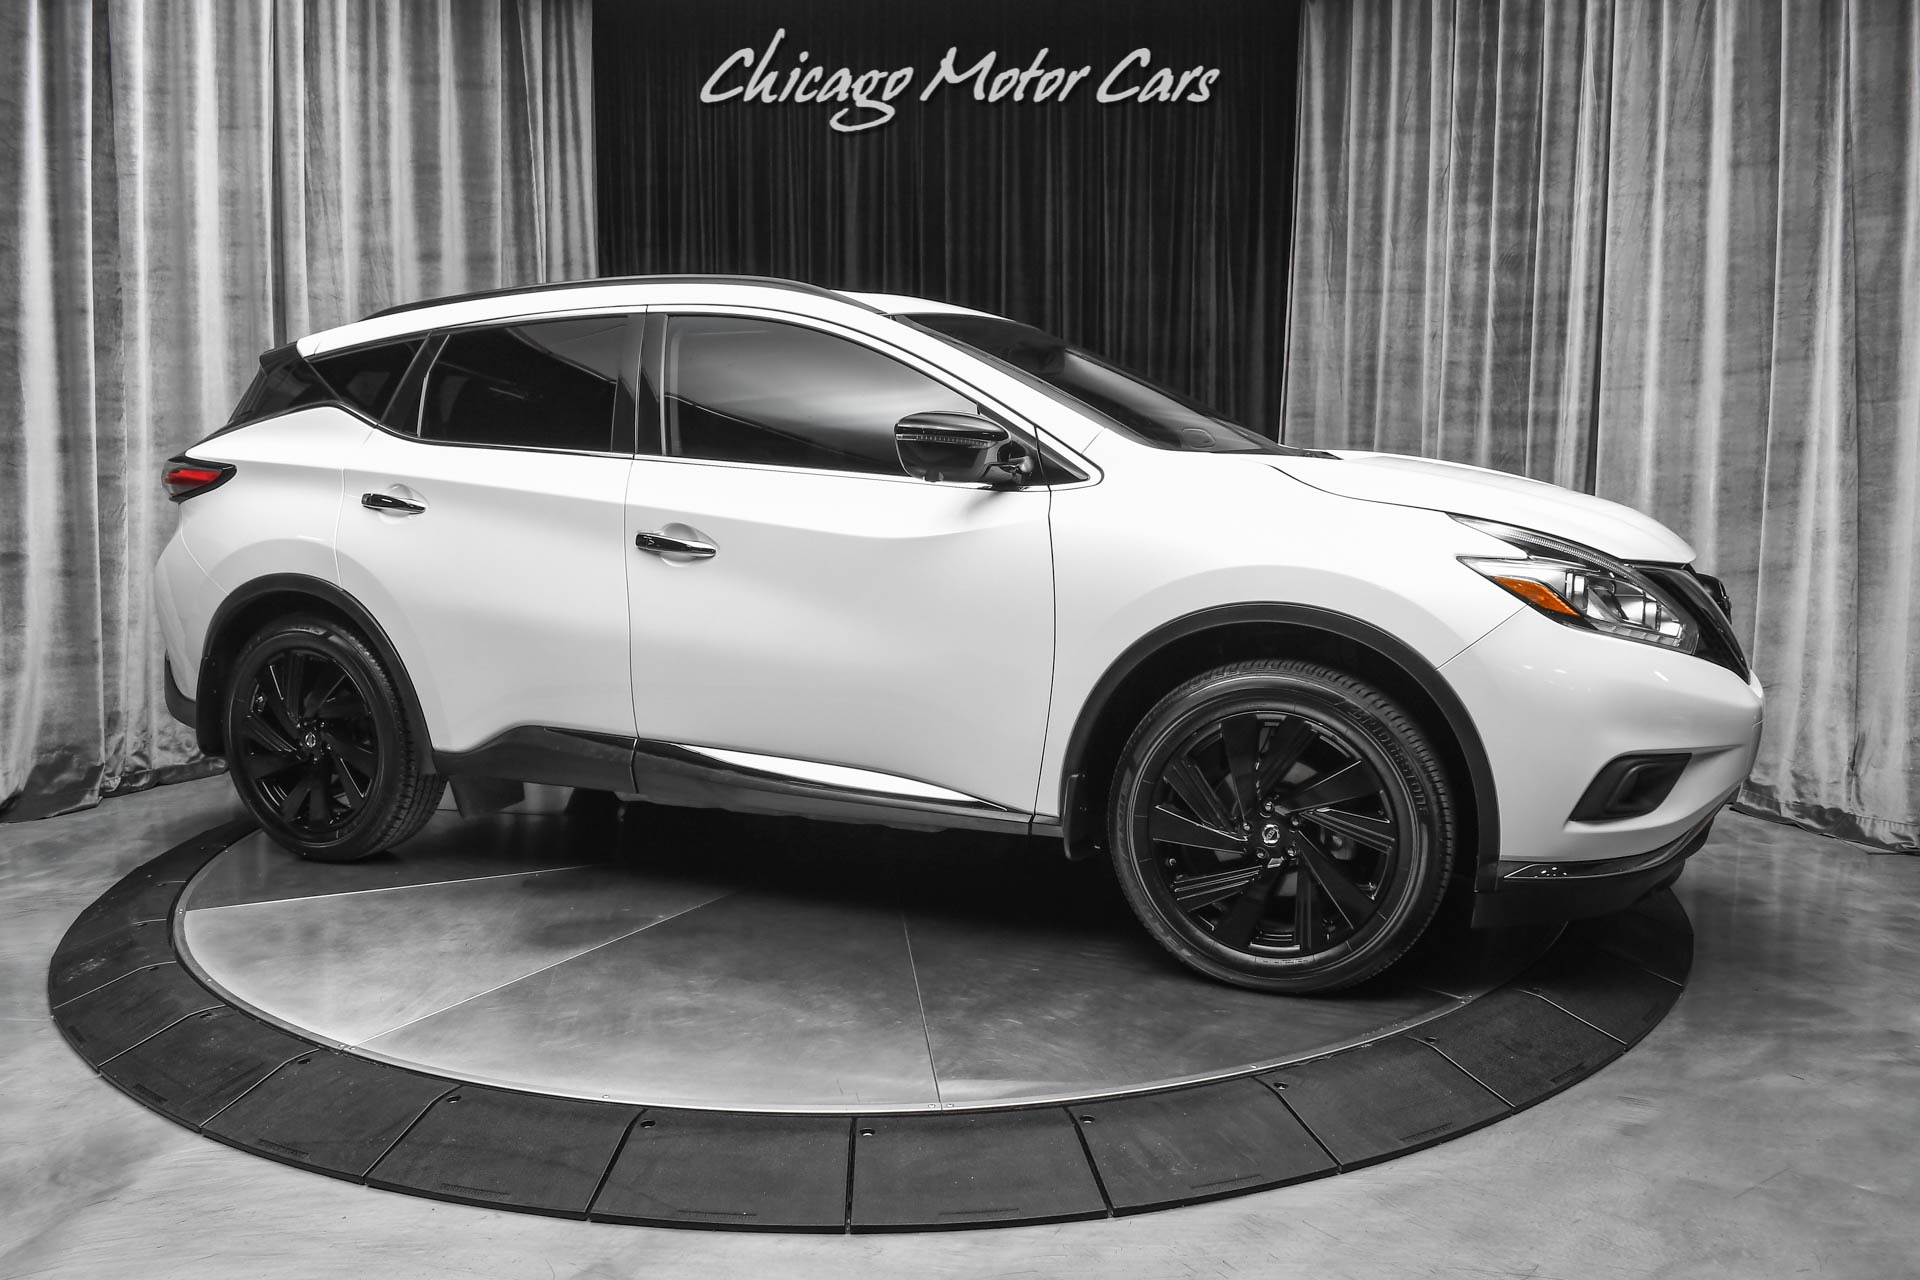 Used 2017 Nissan Murano Platinum 44kmsrp Technology Package Midnight